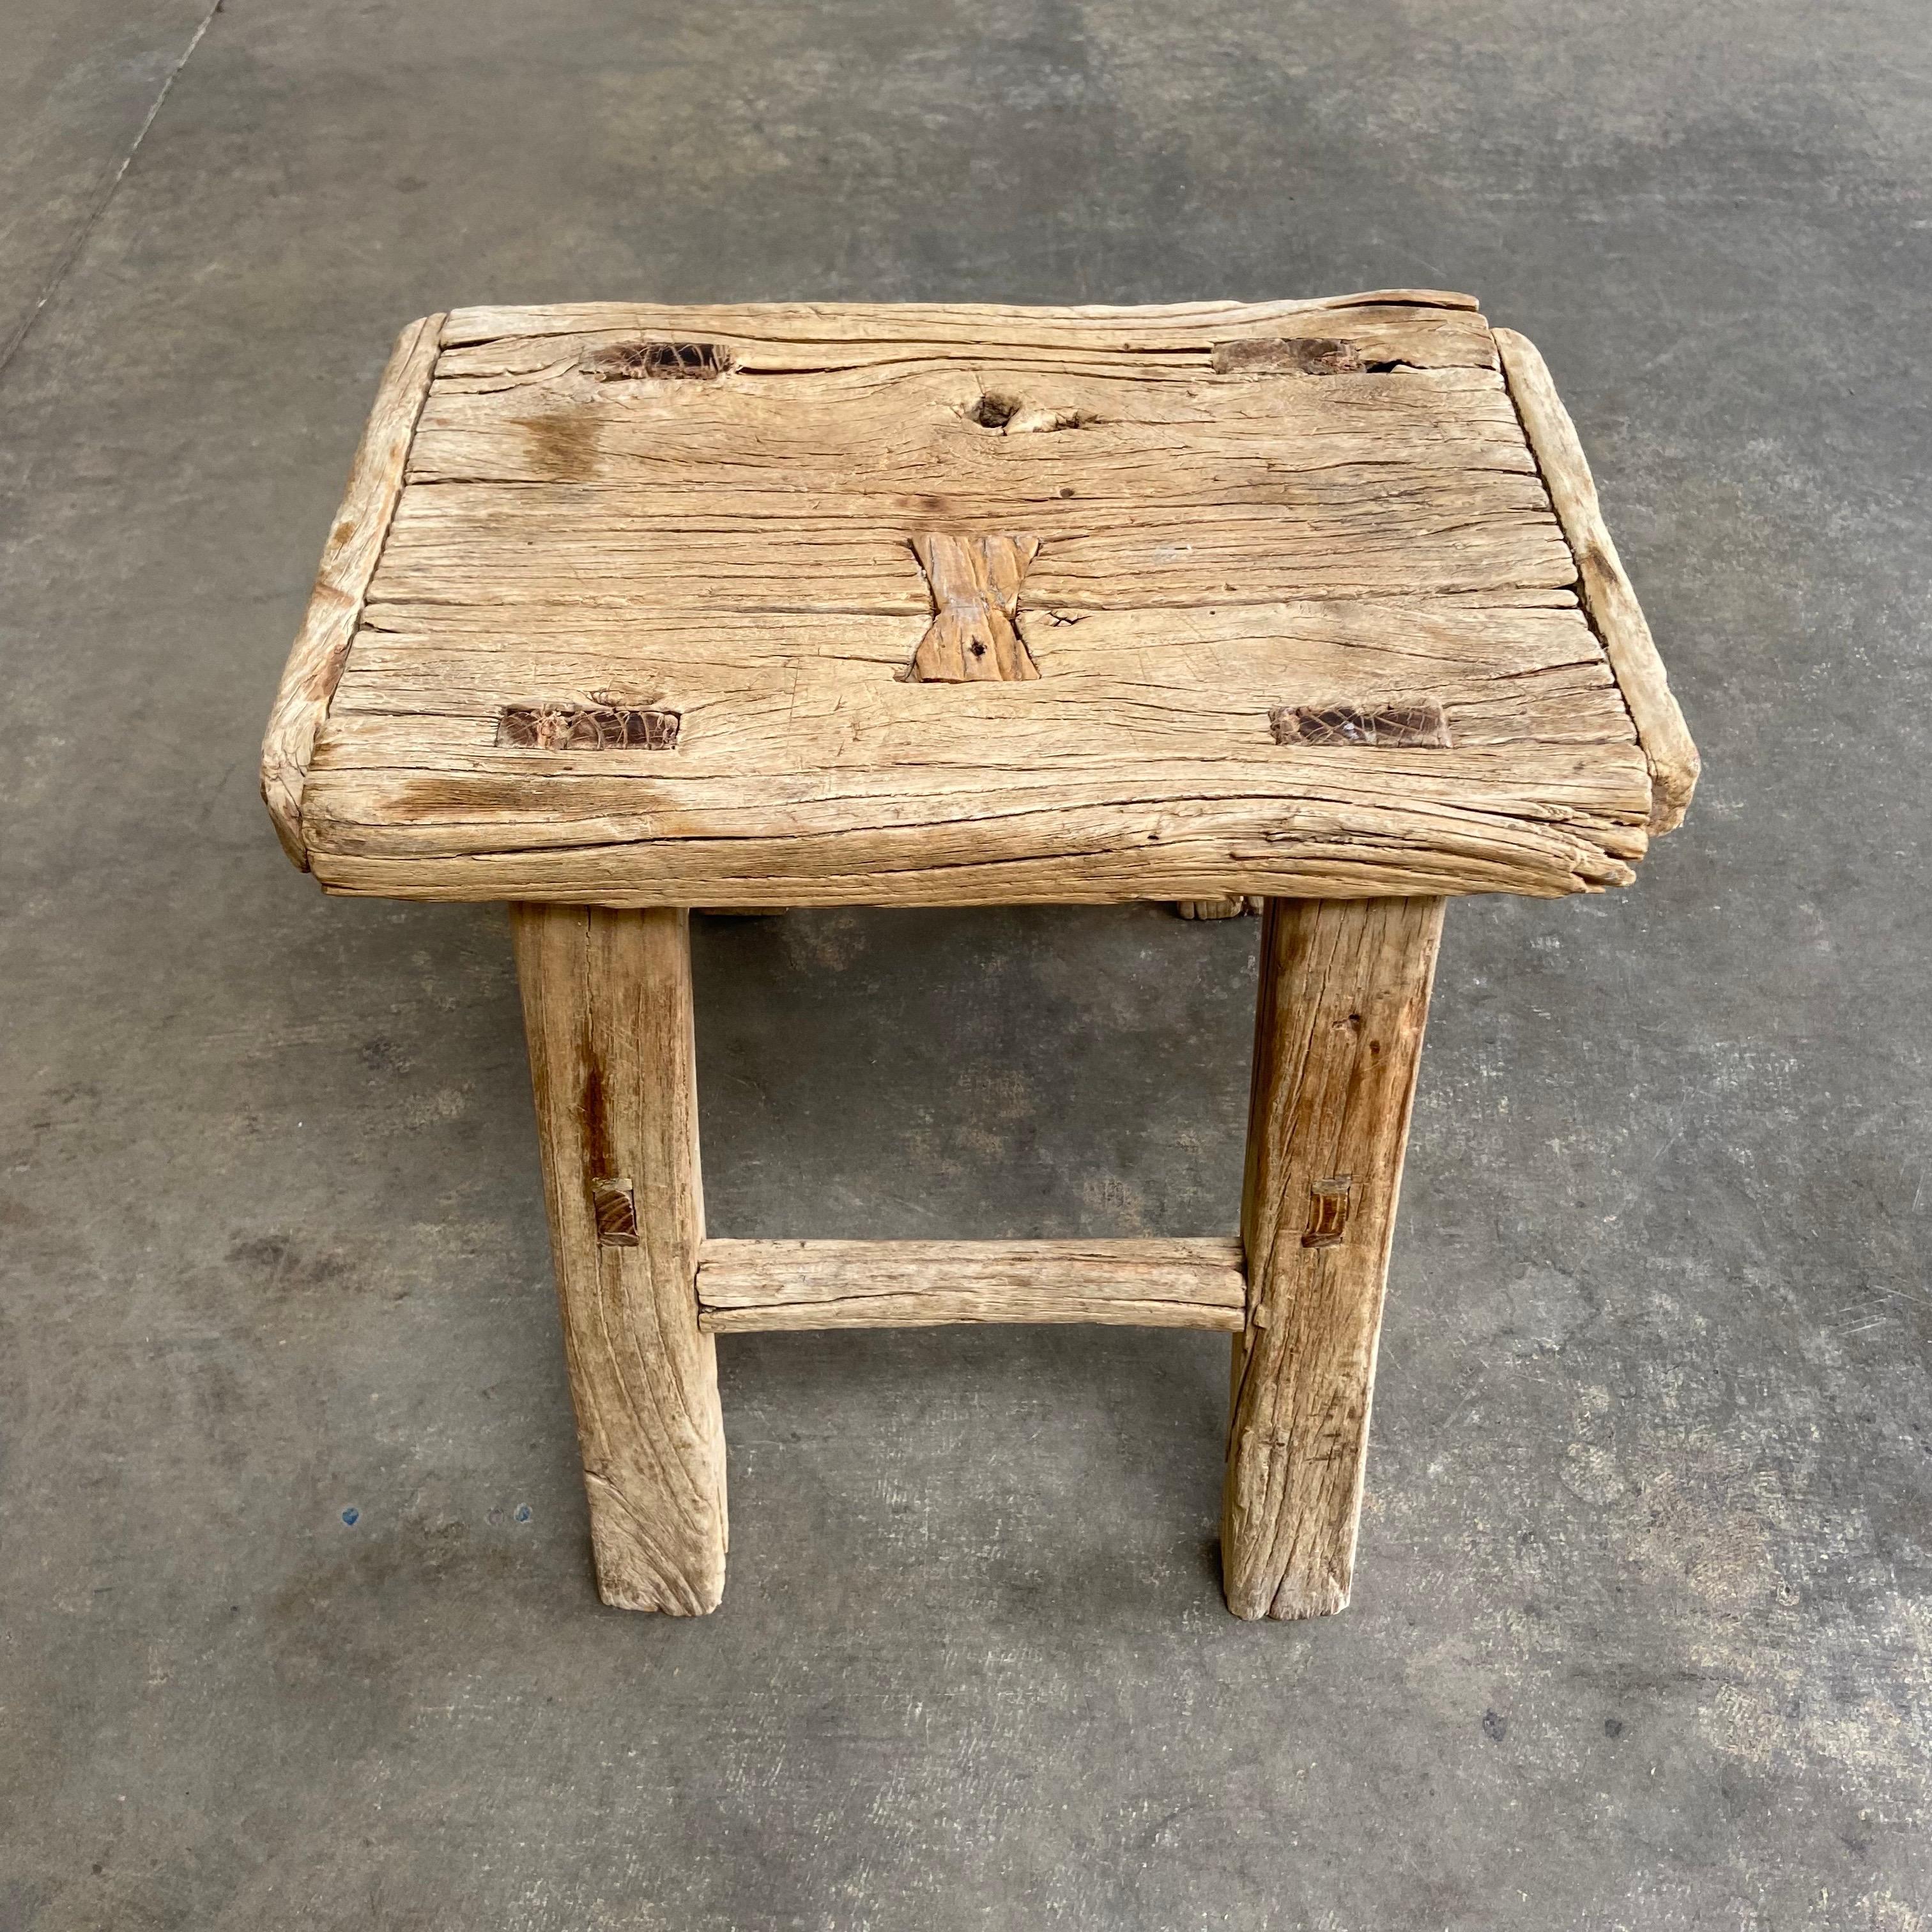 Vintage Antique Elm Wood Stool
These are the real vintage antique elm wood stools! Beautiful antique patina, with weathering and age, these are solid and sturdy ready for daily use, use as a table, stool, drink table, they are great for any space.